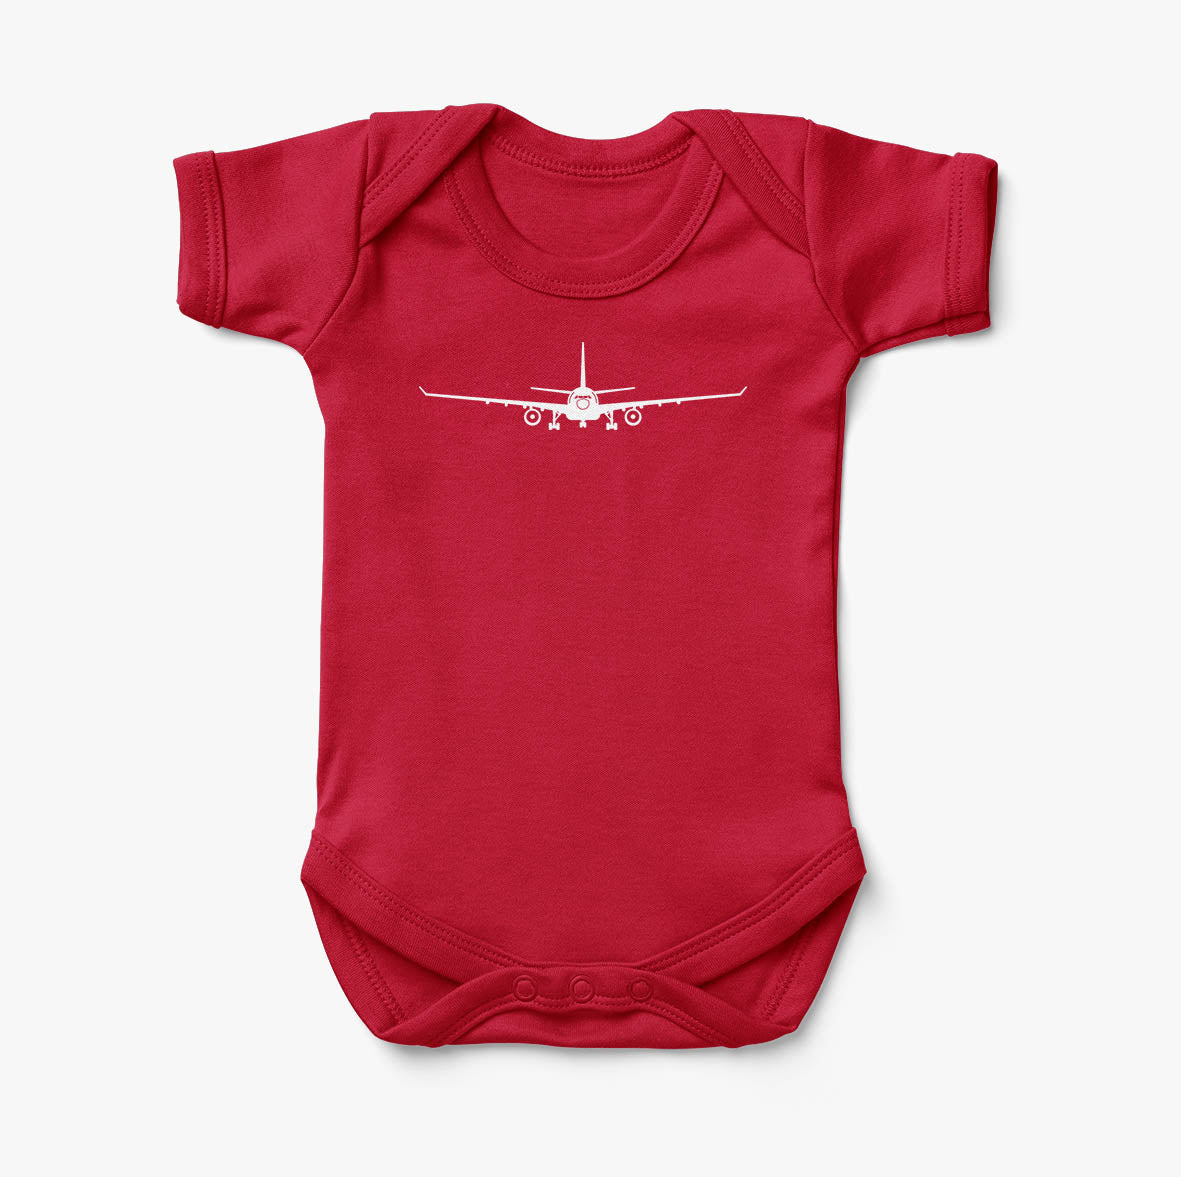 Airbus A330 Silhouette Designed Baby Bodysuits